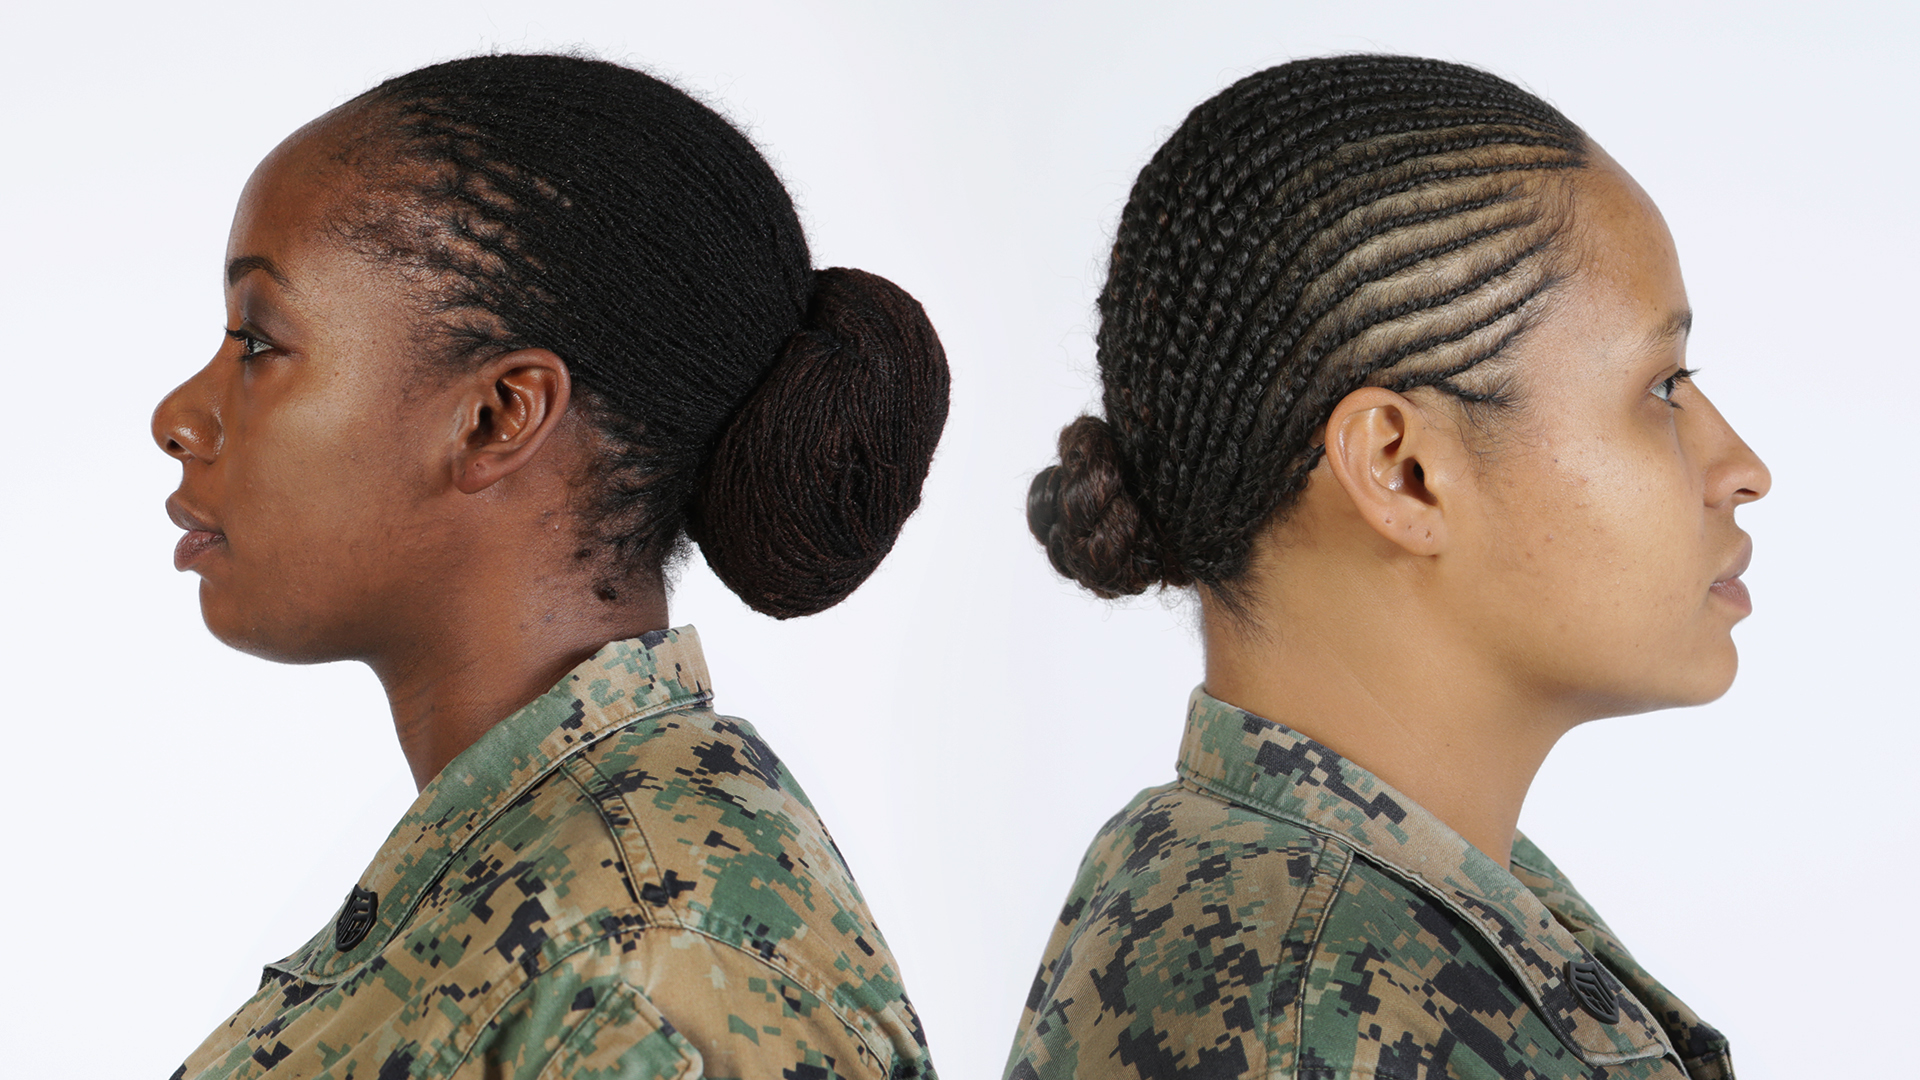 Soldiers cheer Army's decision to authorize dreadlocks in uniform